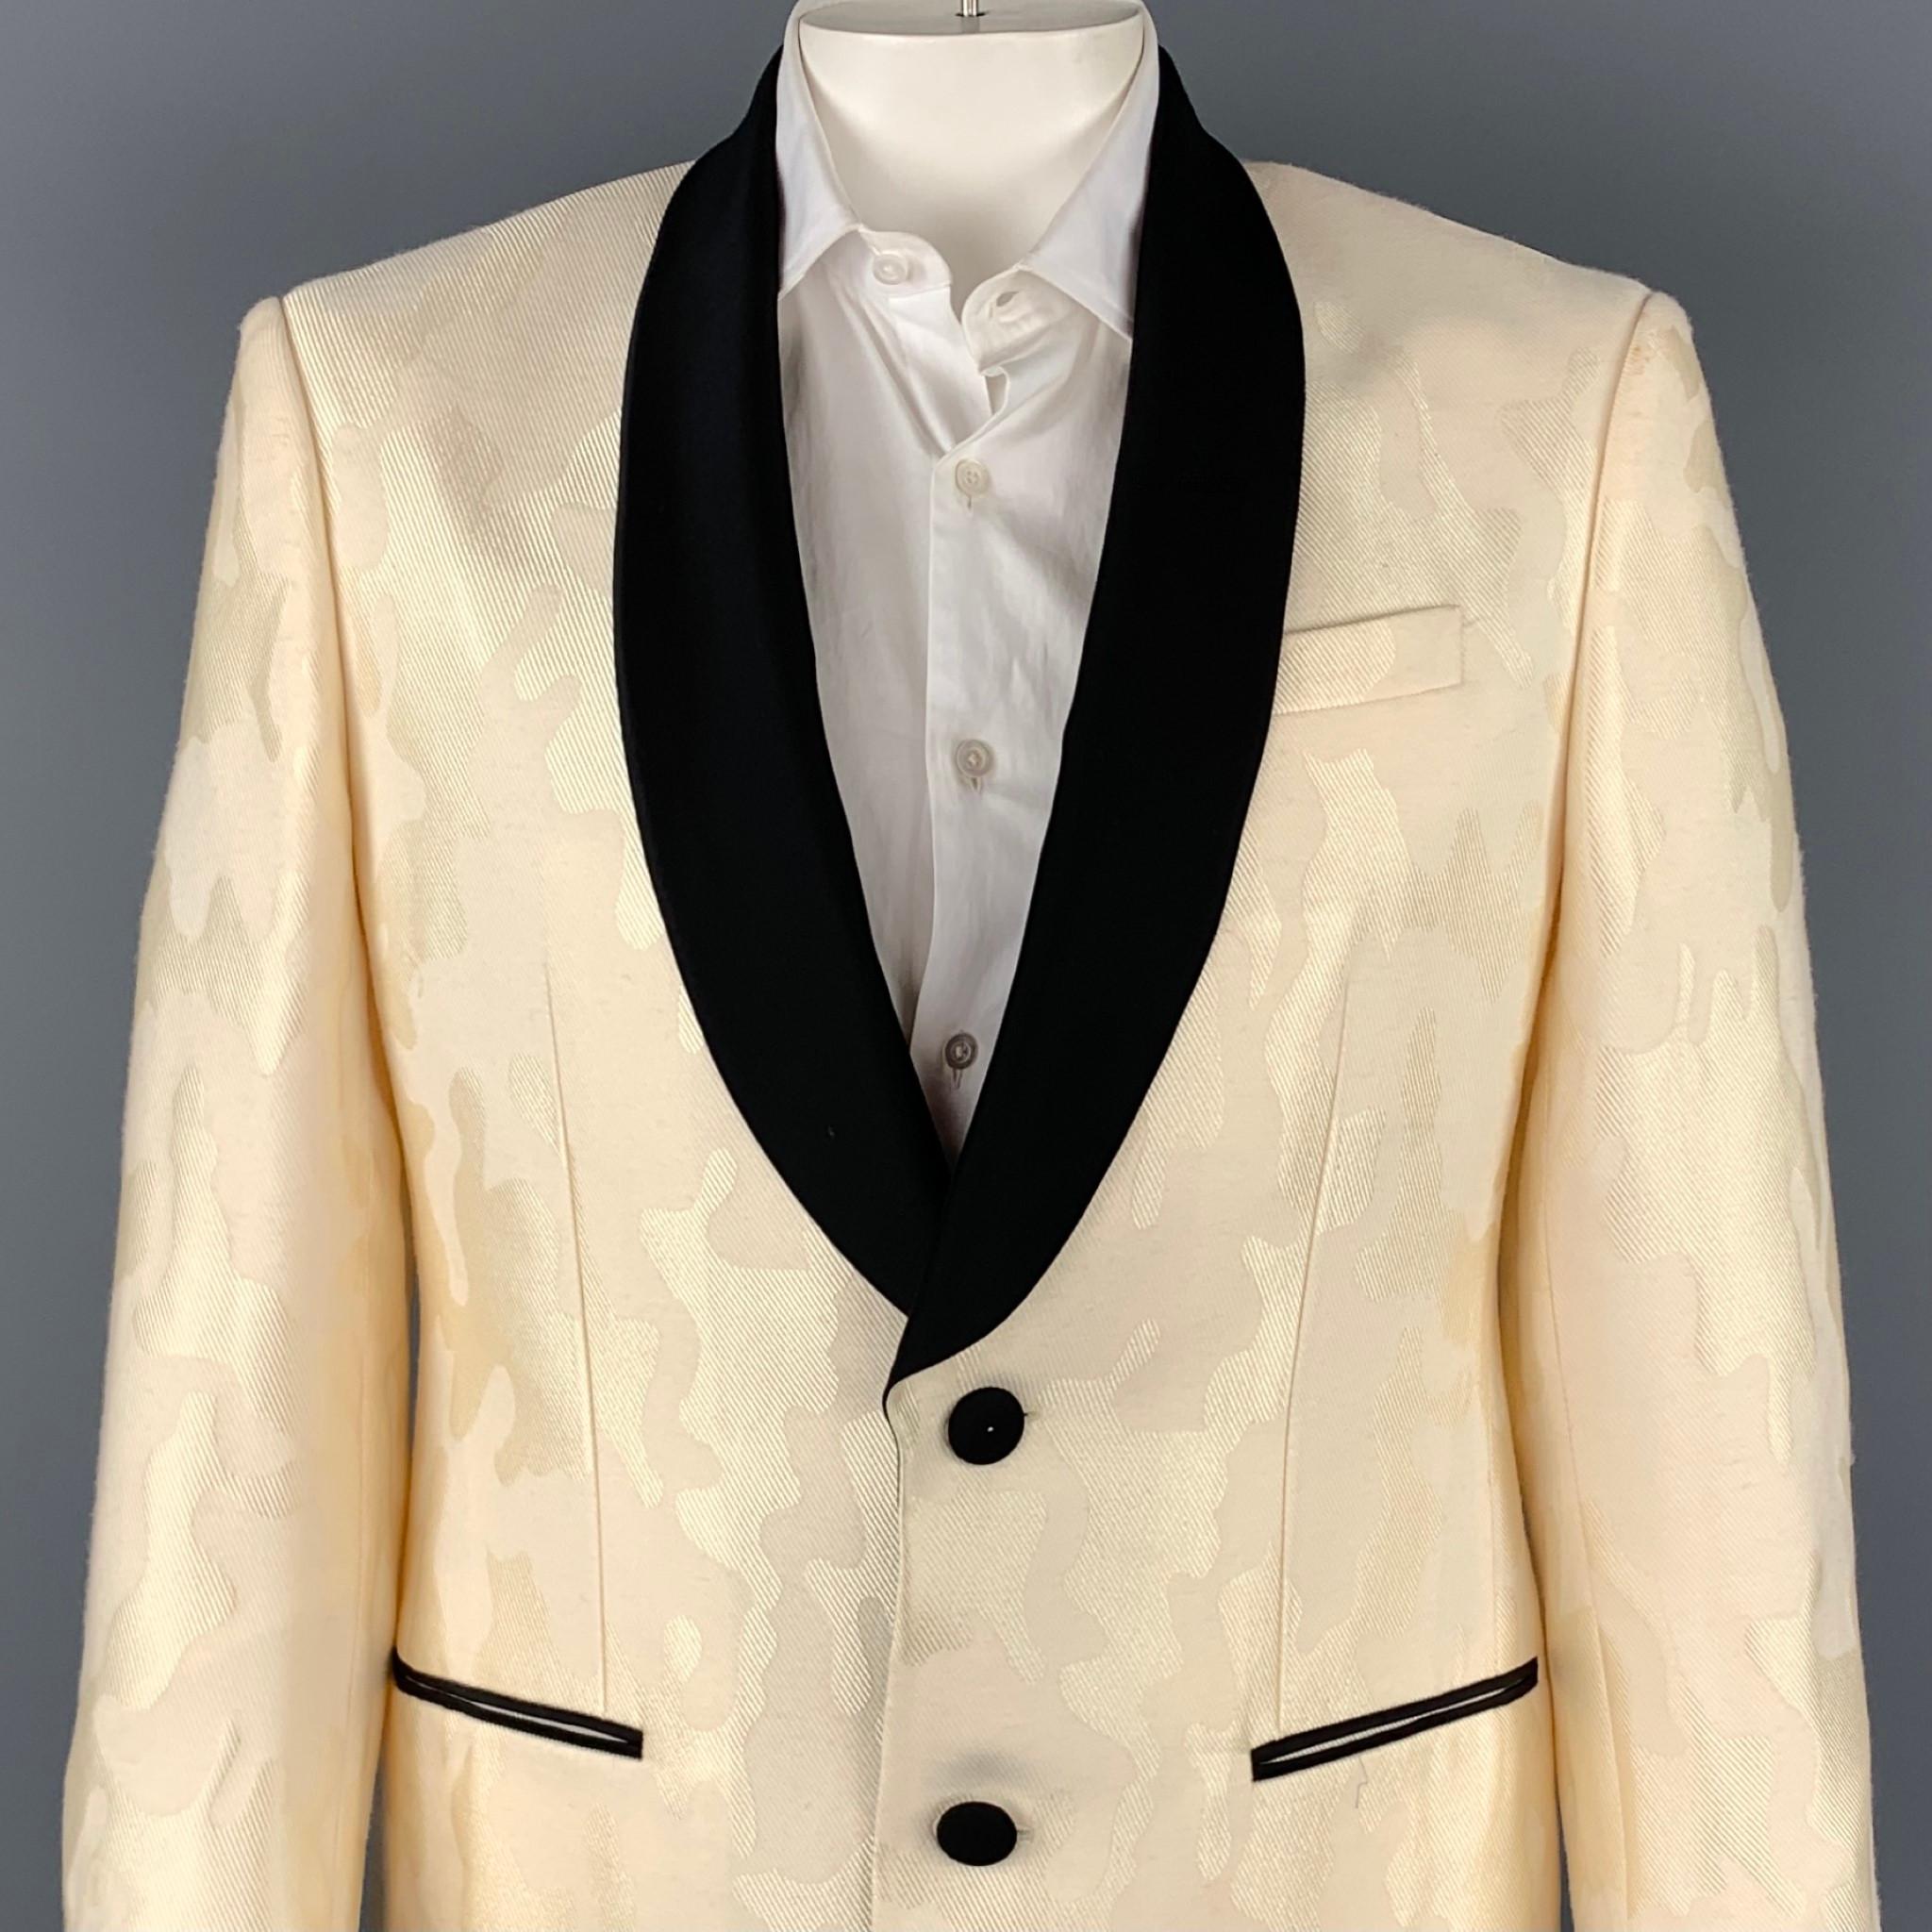 BALLY sport coat comes in a beige jacquard viscose blend with a full liner featuring a shawl collar, slit pockets, and  two button closure. Made in Italy.

Very Good Pre-Owned Condition.
Marked: 46

Measurements:

Shoulder: 19 in.
Chest: 42